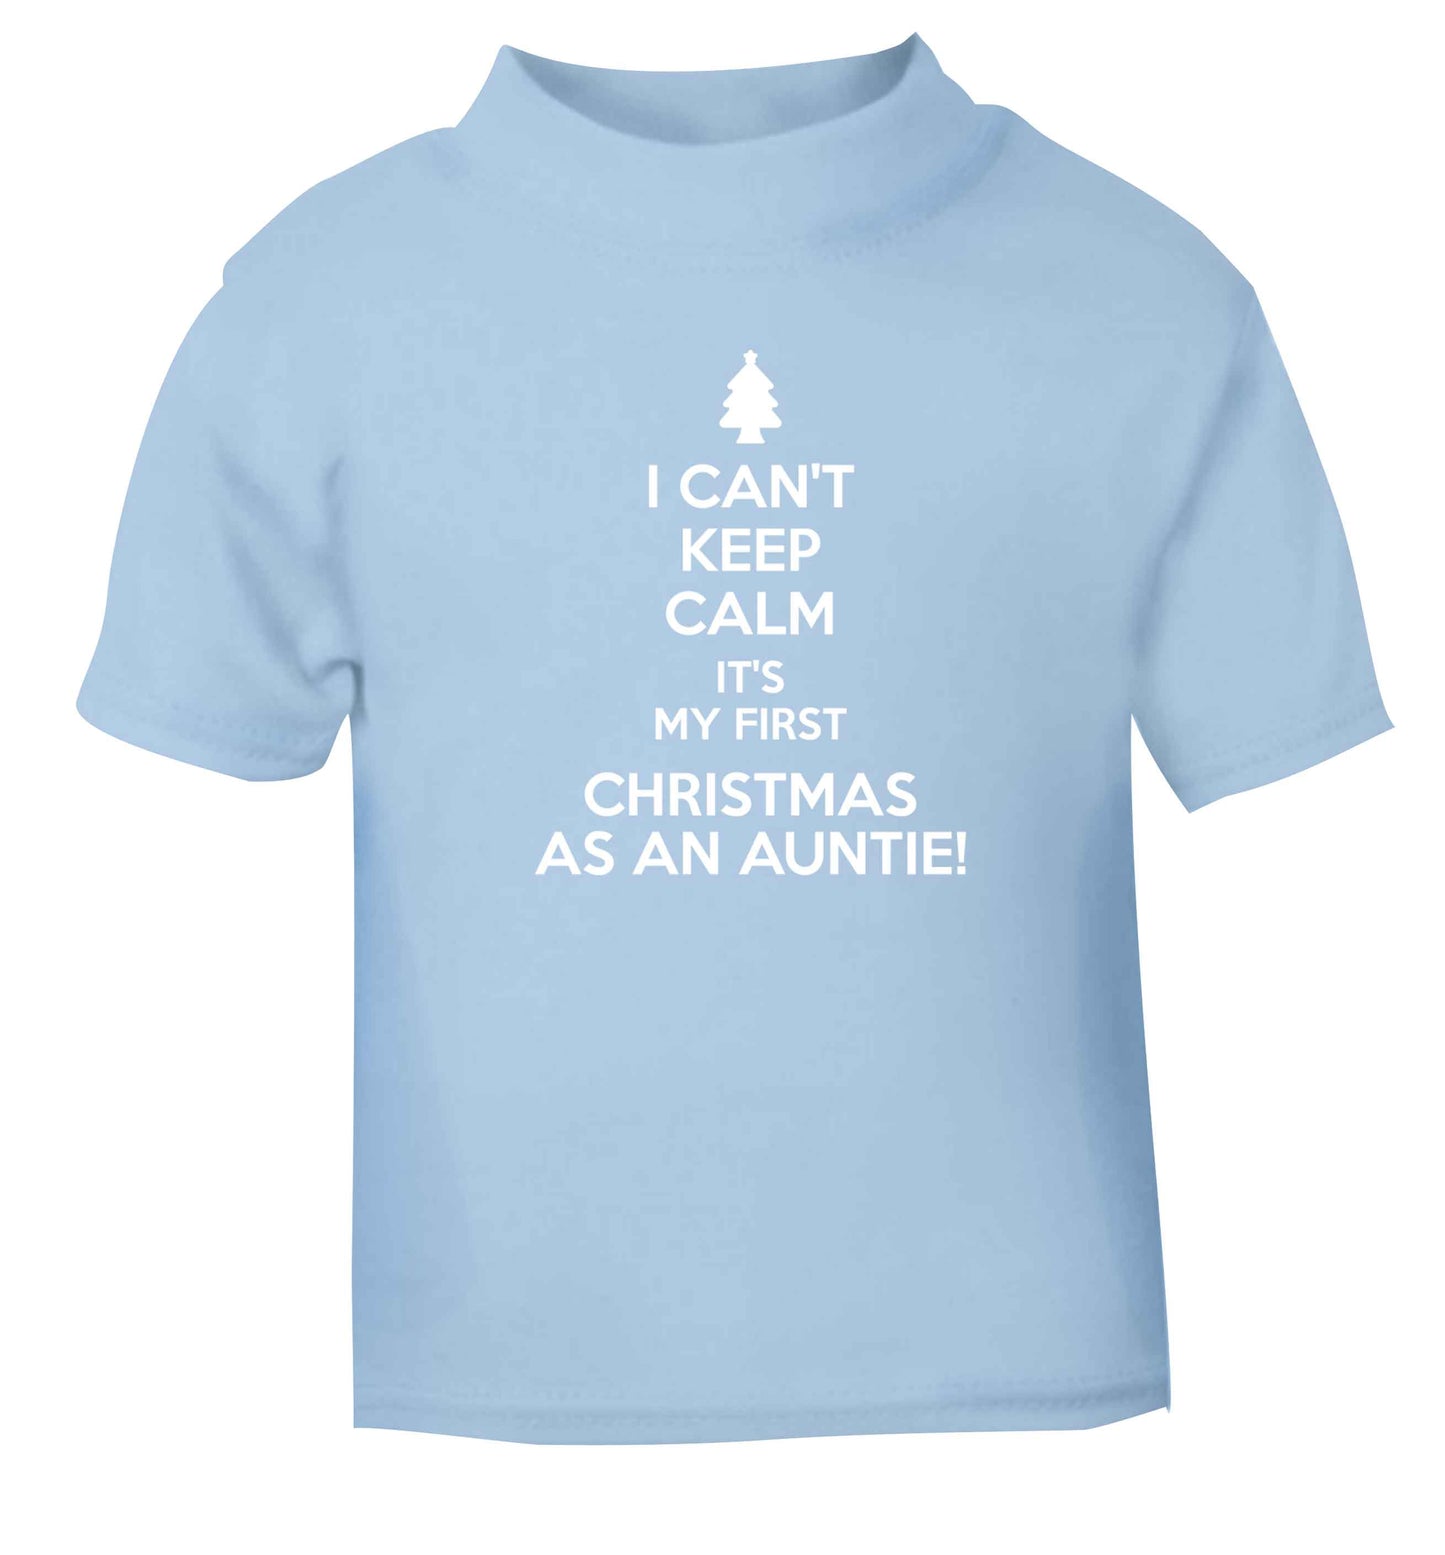 I can't keep calm it's my first Christmas as an auntie! light blue Baby Toddler Tshirt 2 Years